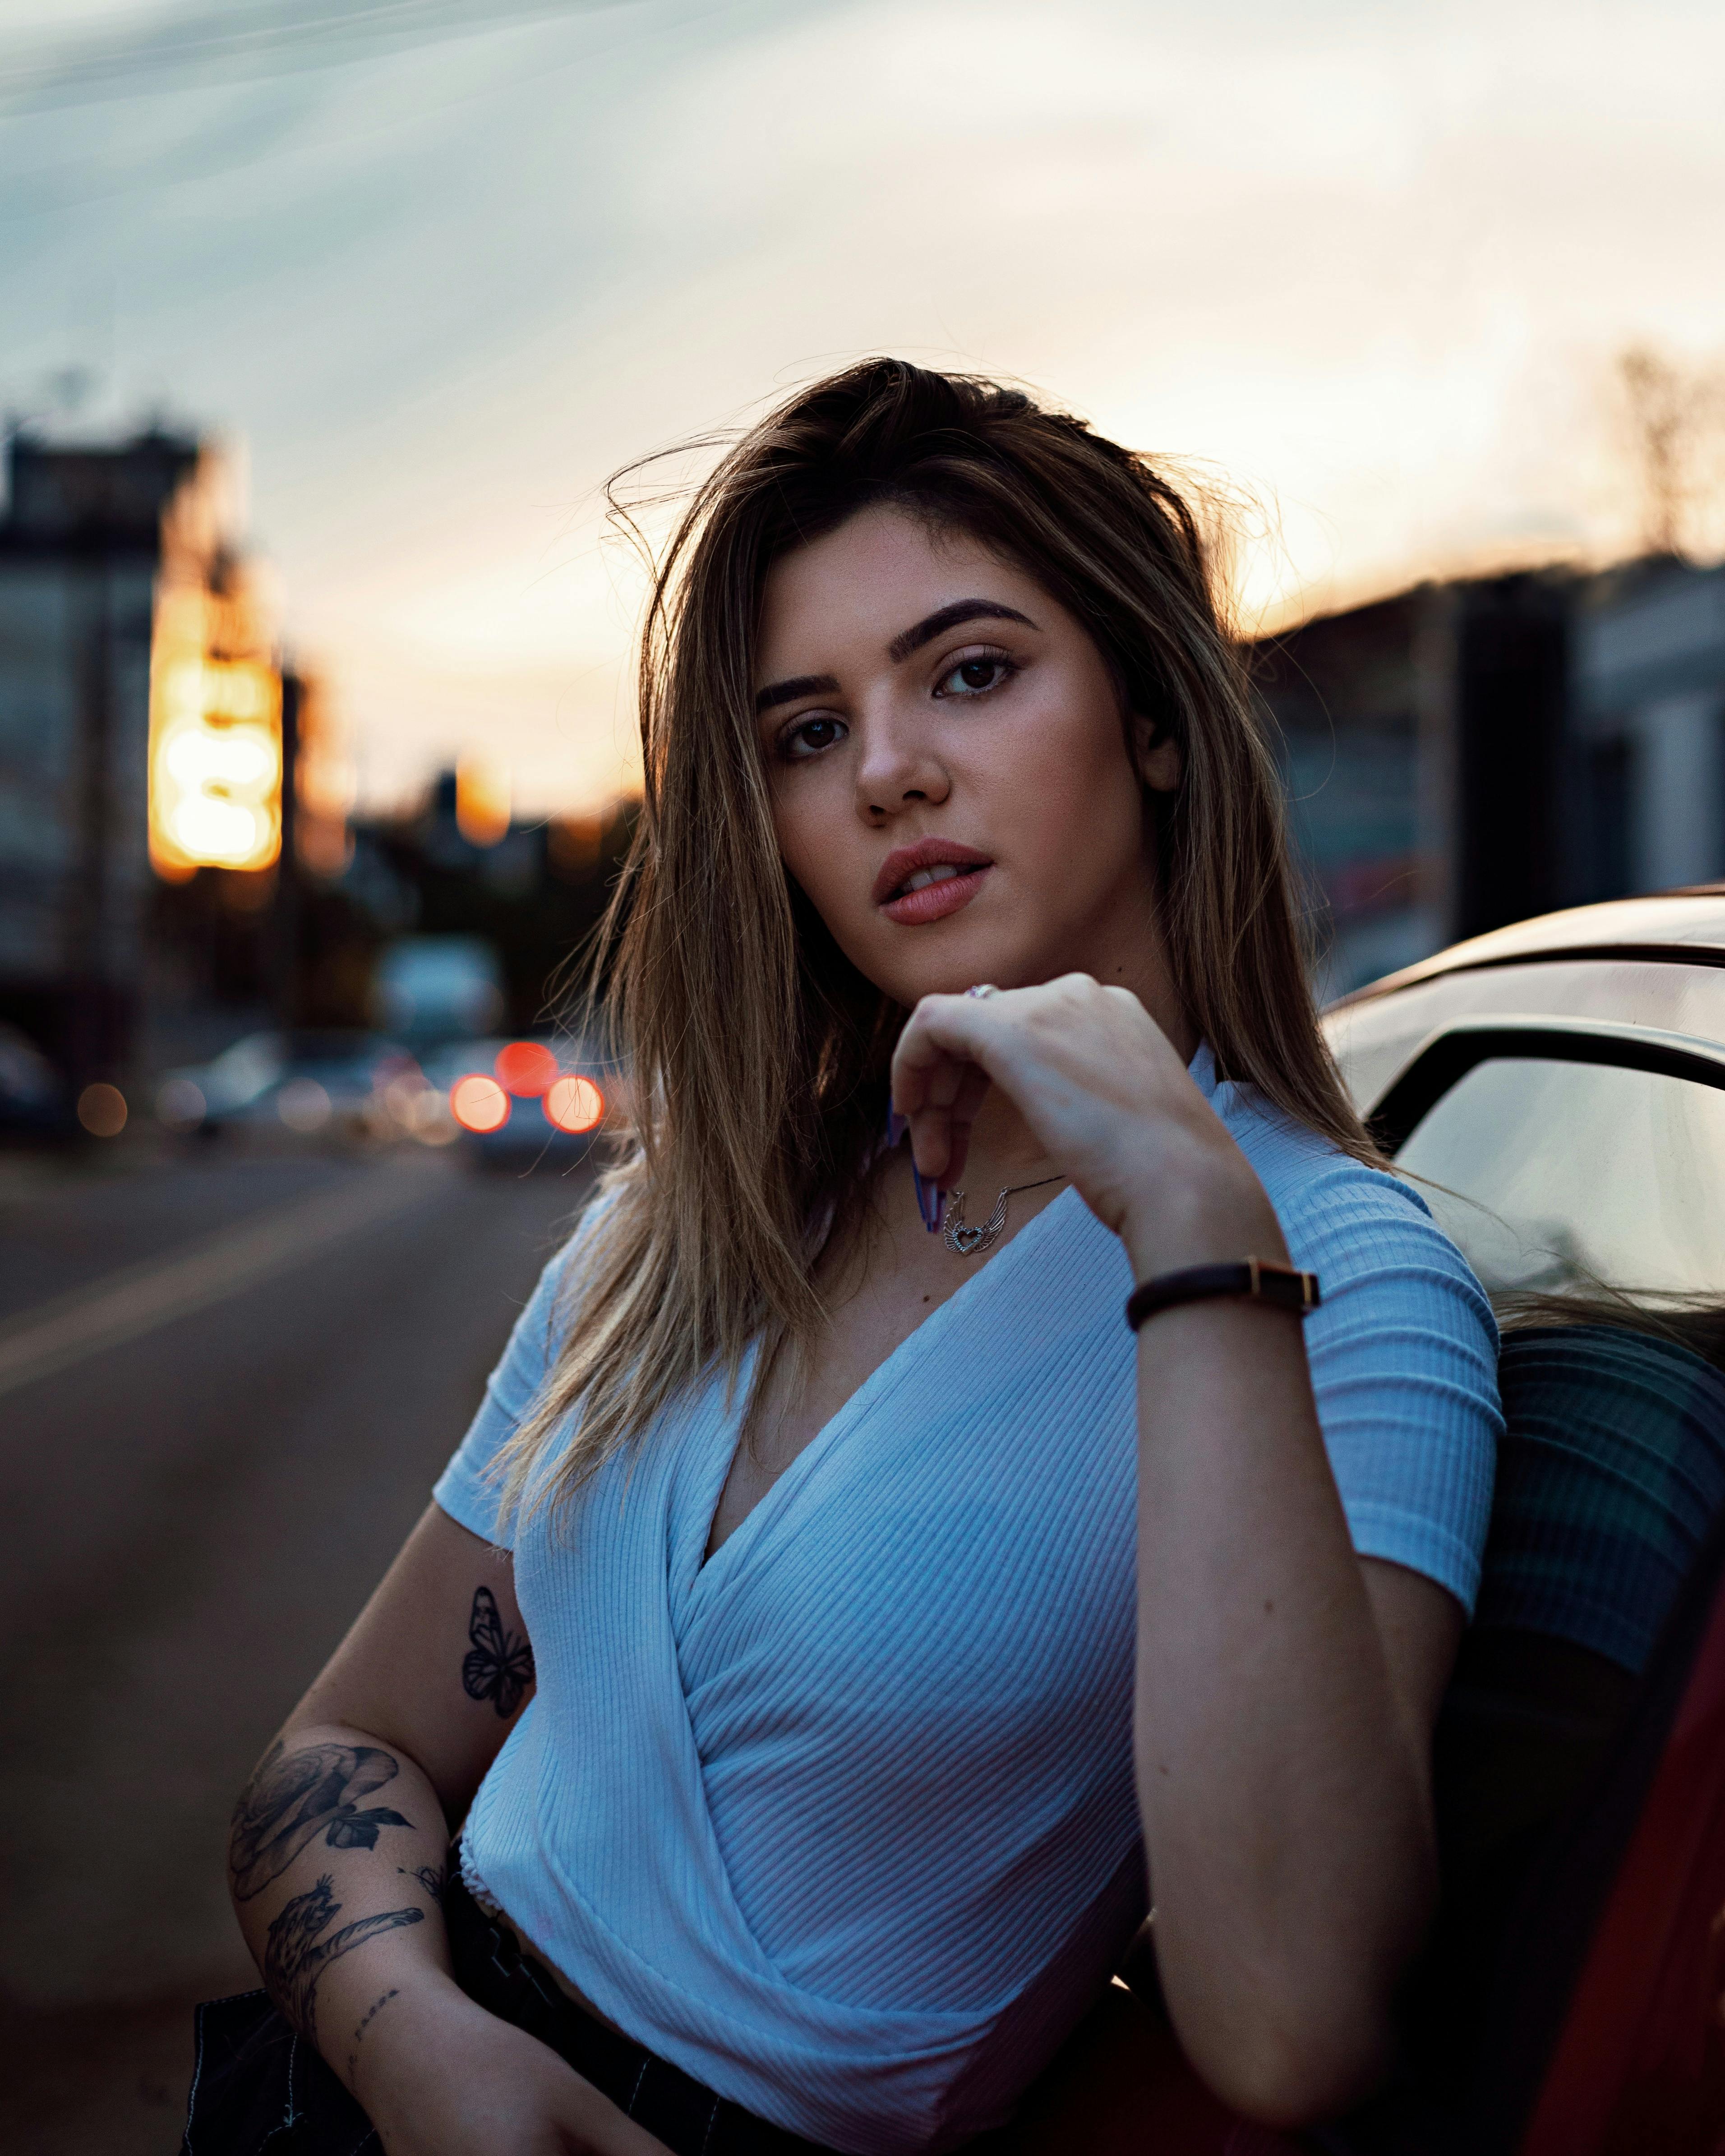 close up photo of woman leaning on vehicle posing